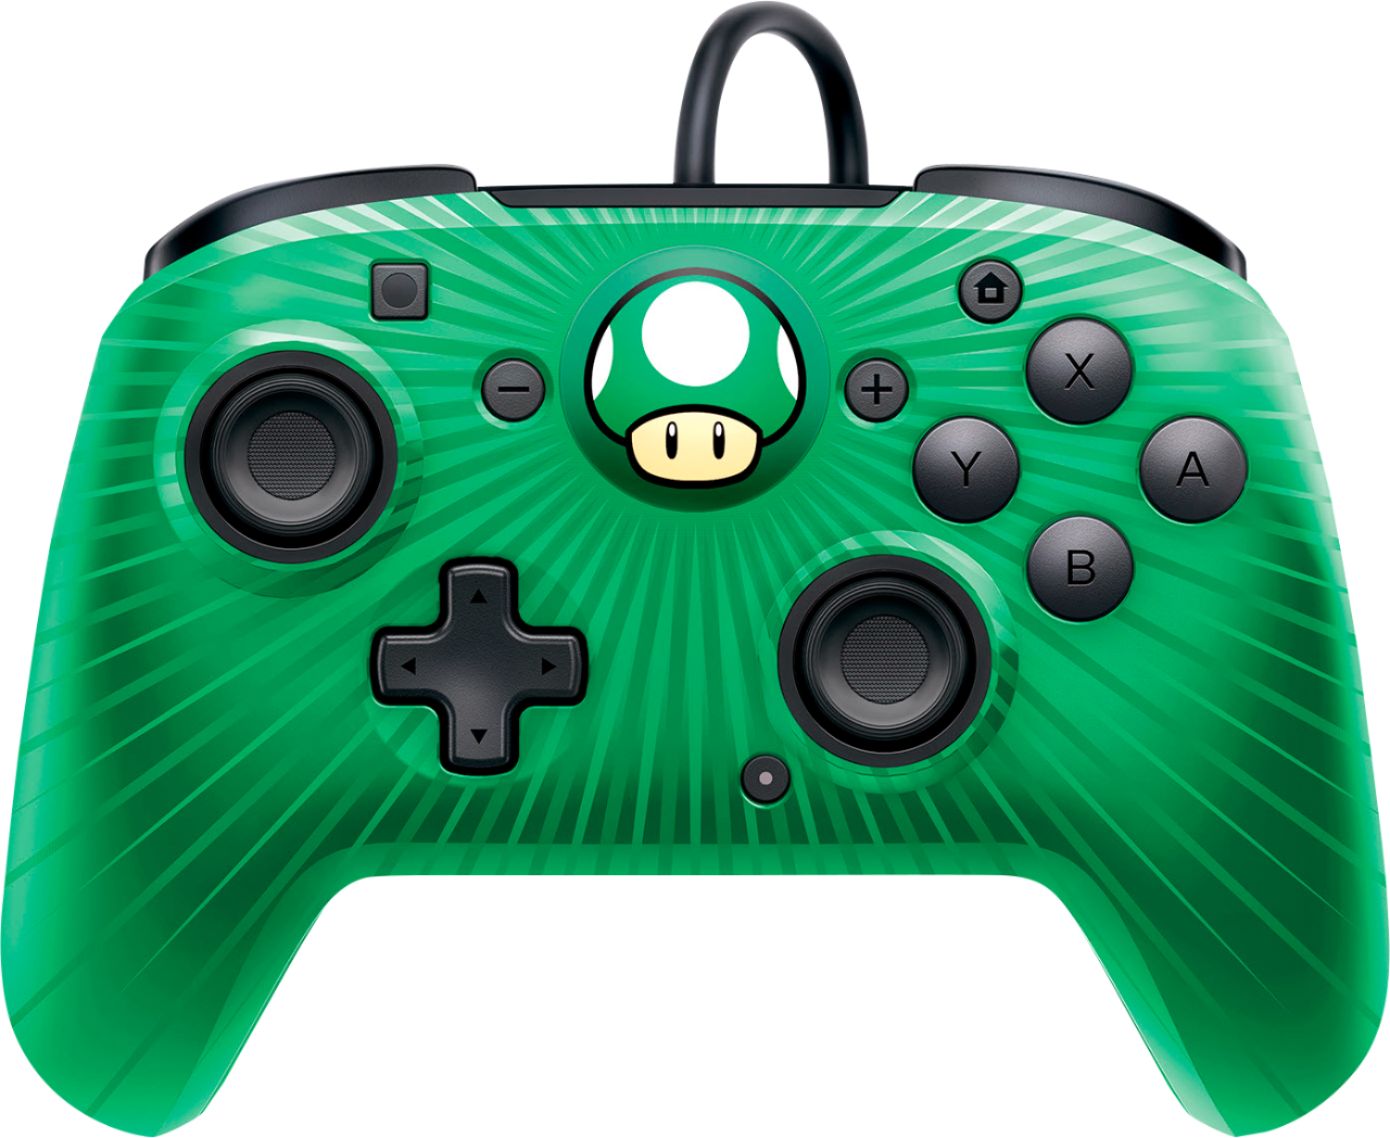 switch wired pro controller